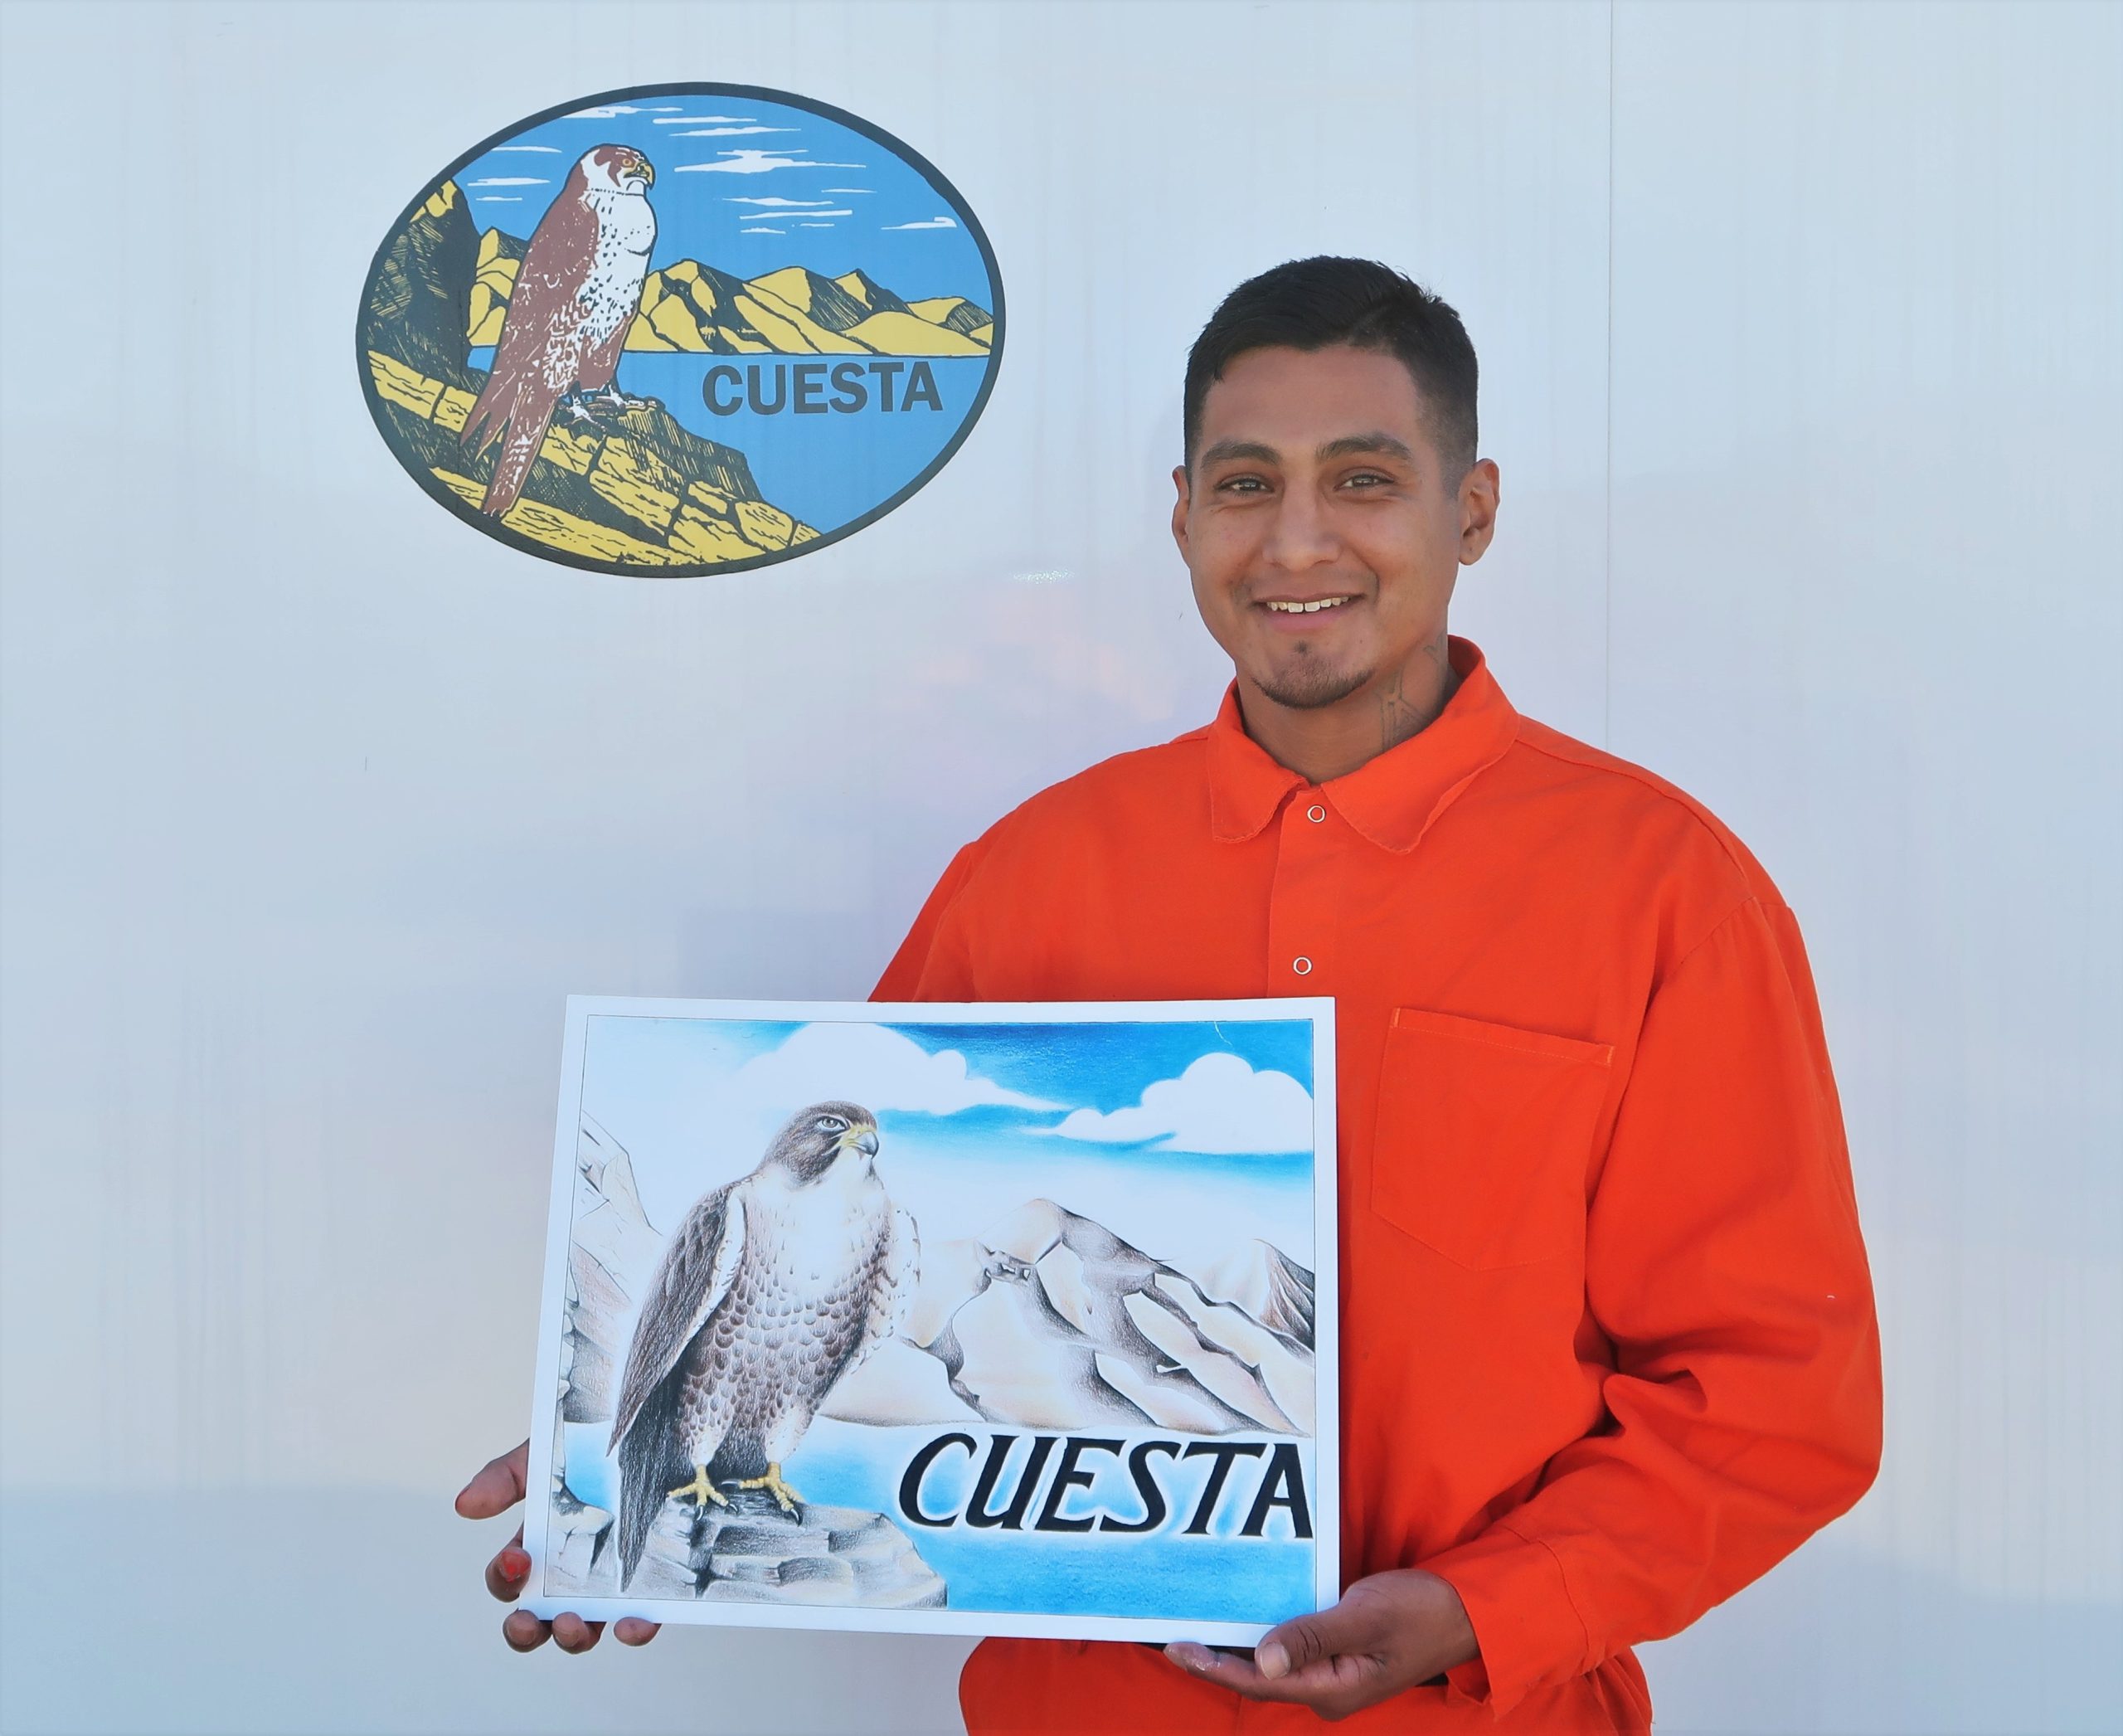 Camp Cuesta firefighter artist holds drawing of falcon mascot.